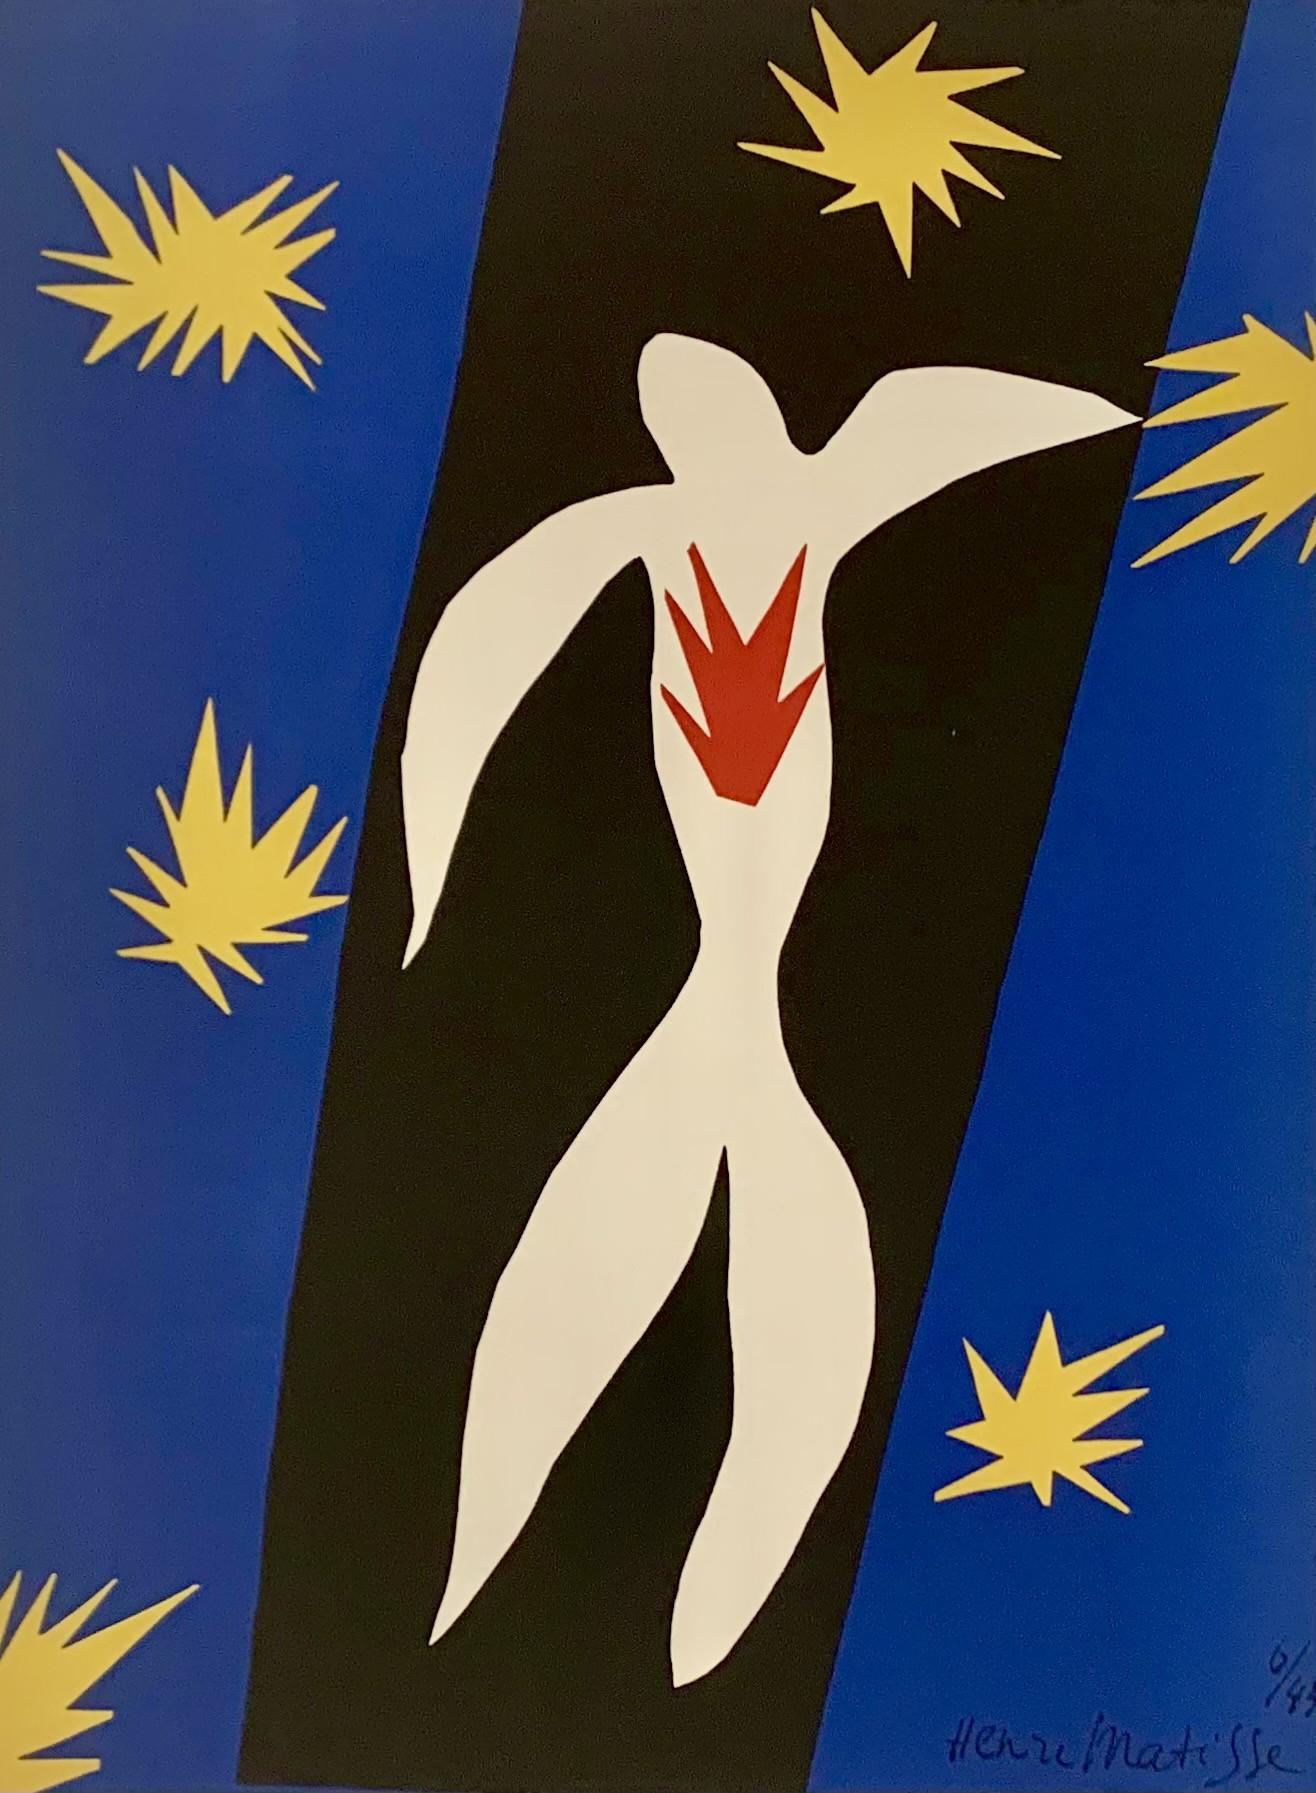 La Chute d'Icare (The Fall of Icarus) - Print by Henri Matisse